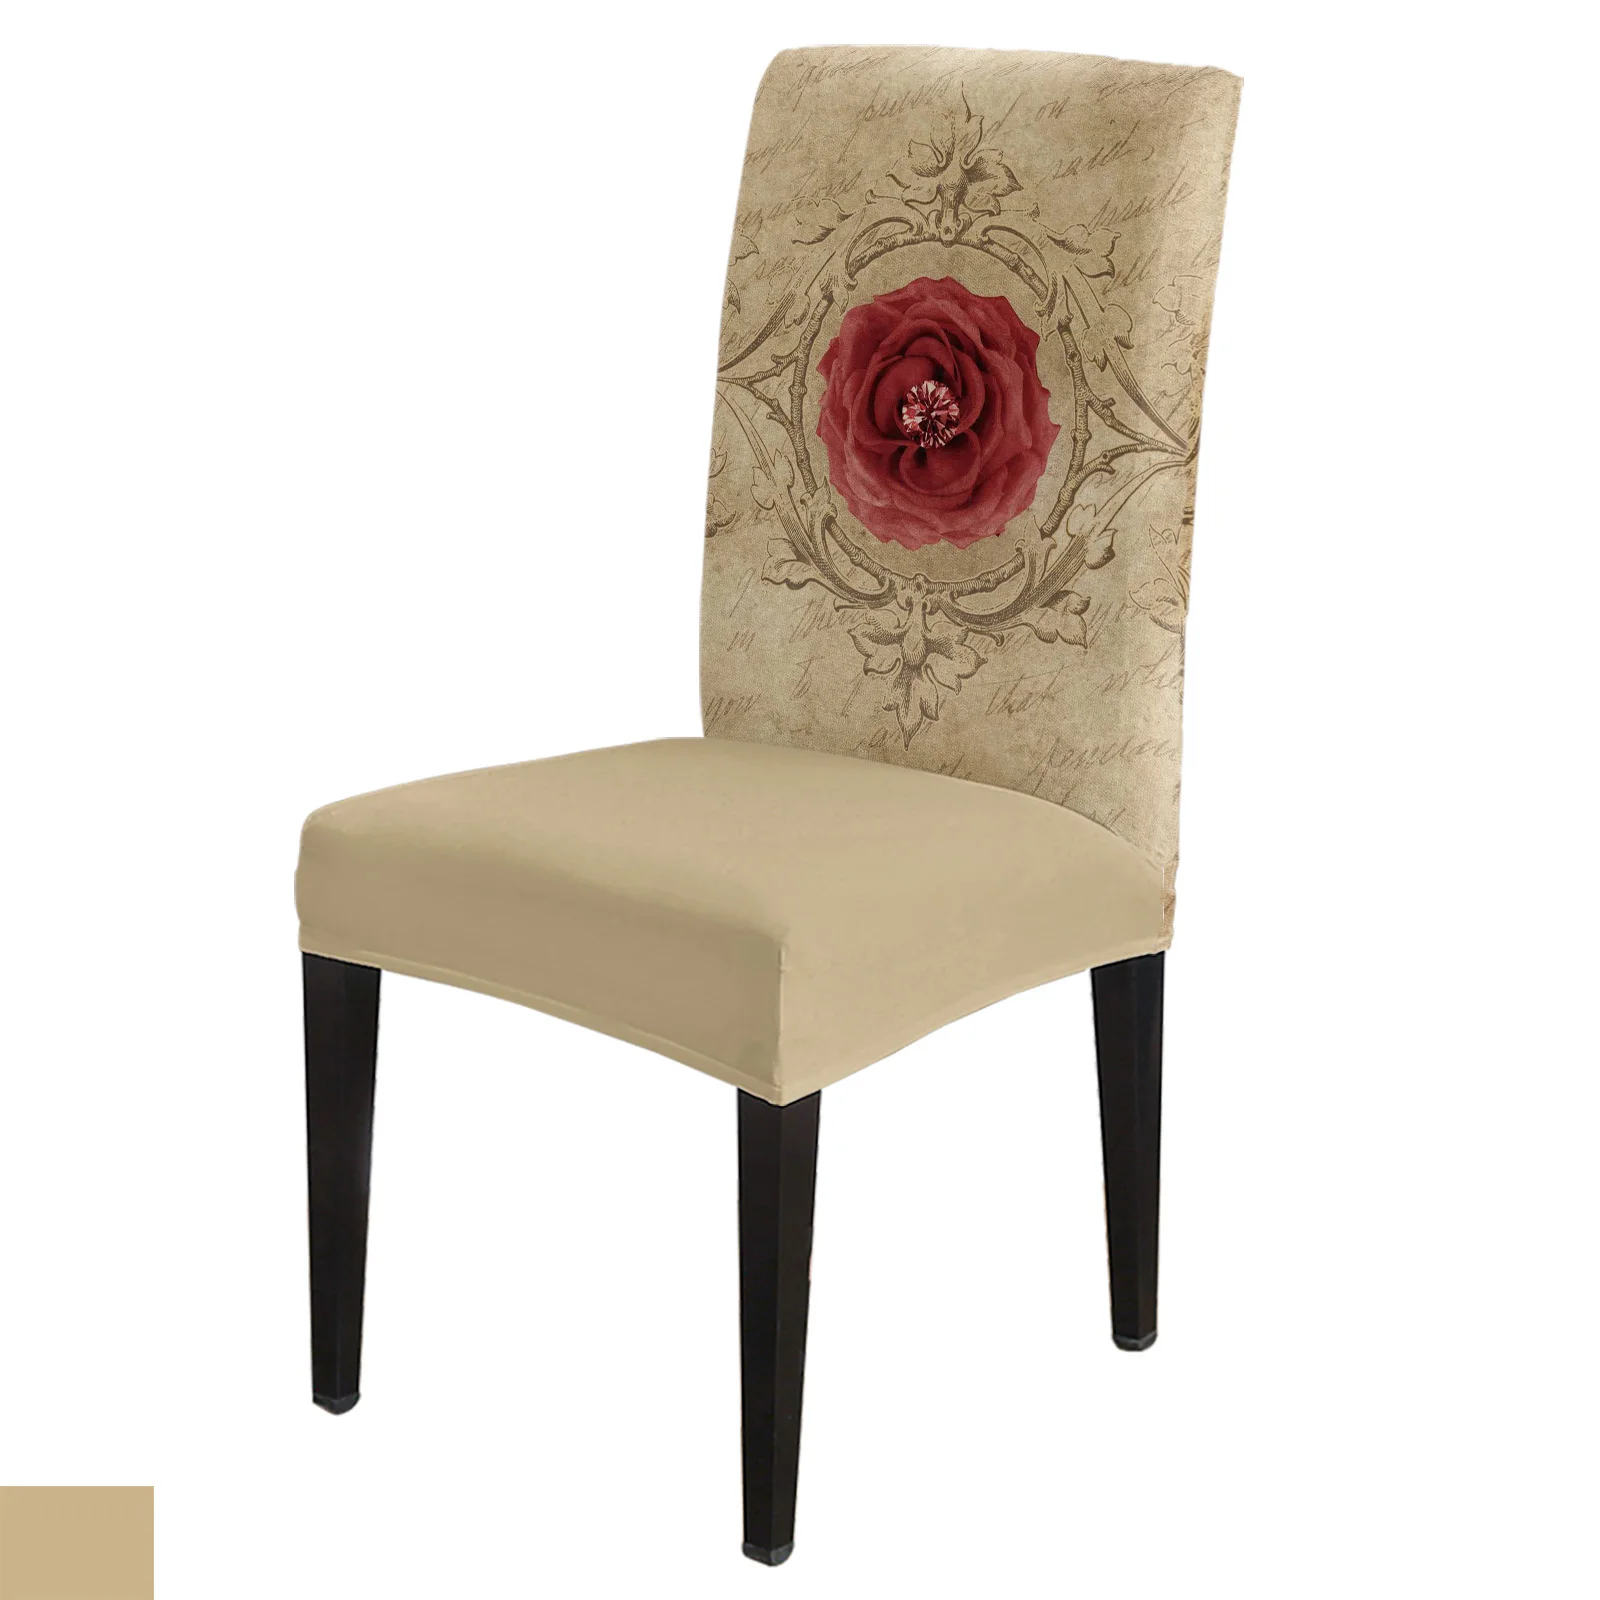 

Retro Red Flower Gem Dining Chair Cover 4/6/8PCS Spandex Elastic Chair Slipcover Case for Wedding Hotel Banquet Dining Room